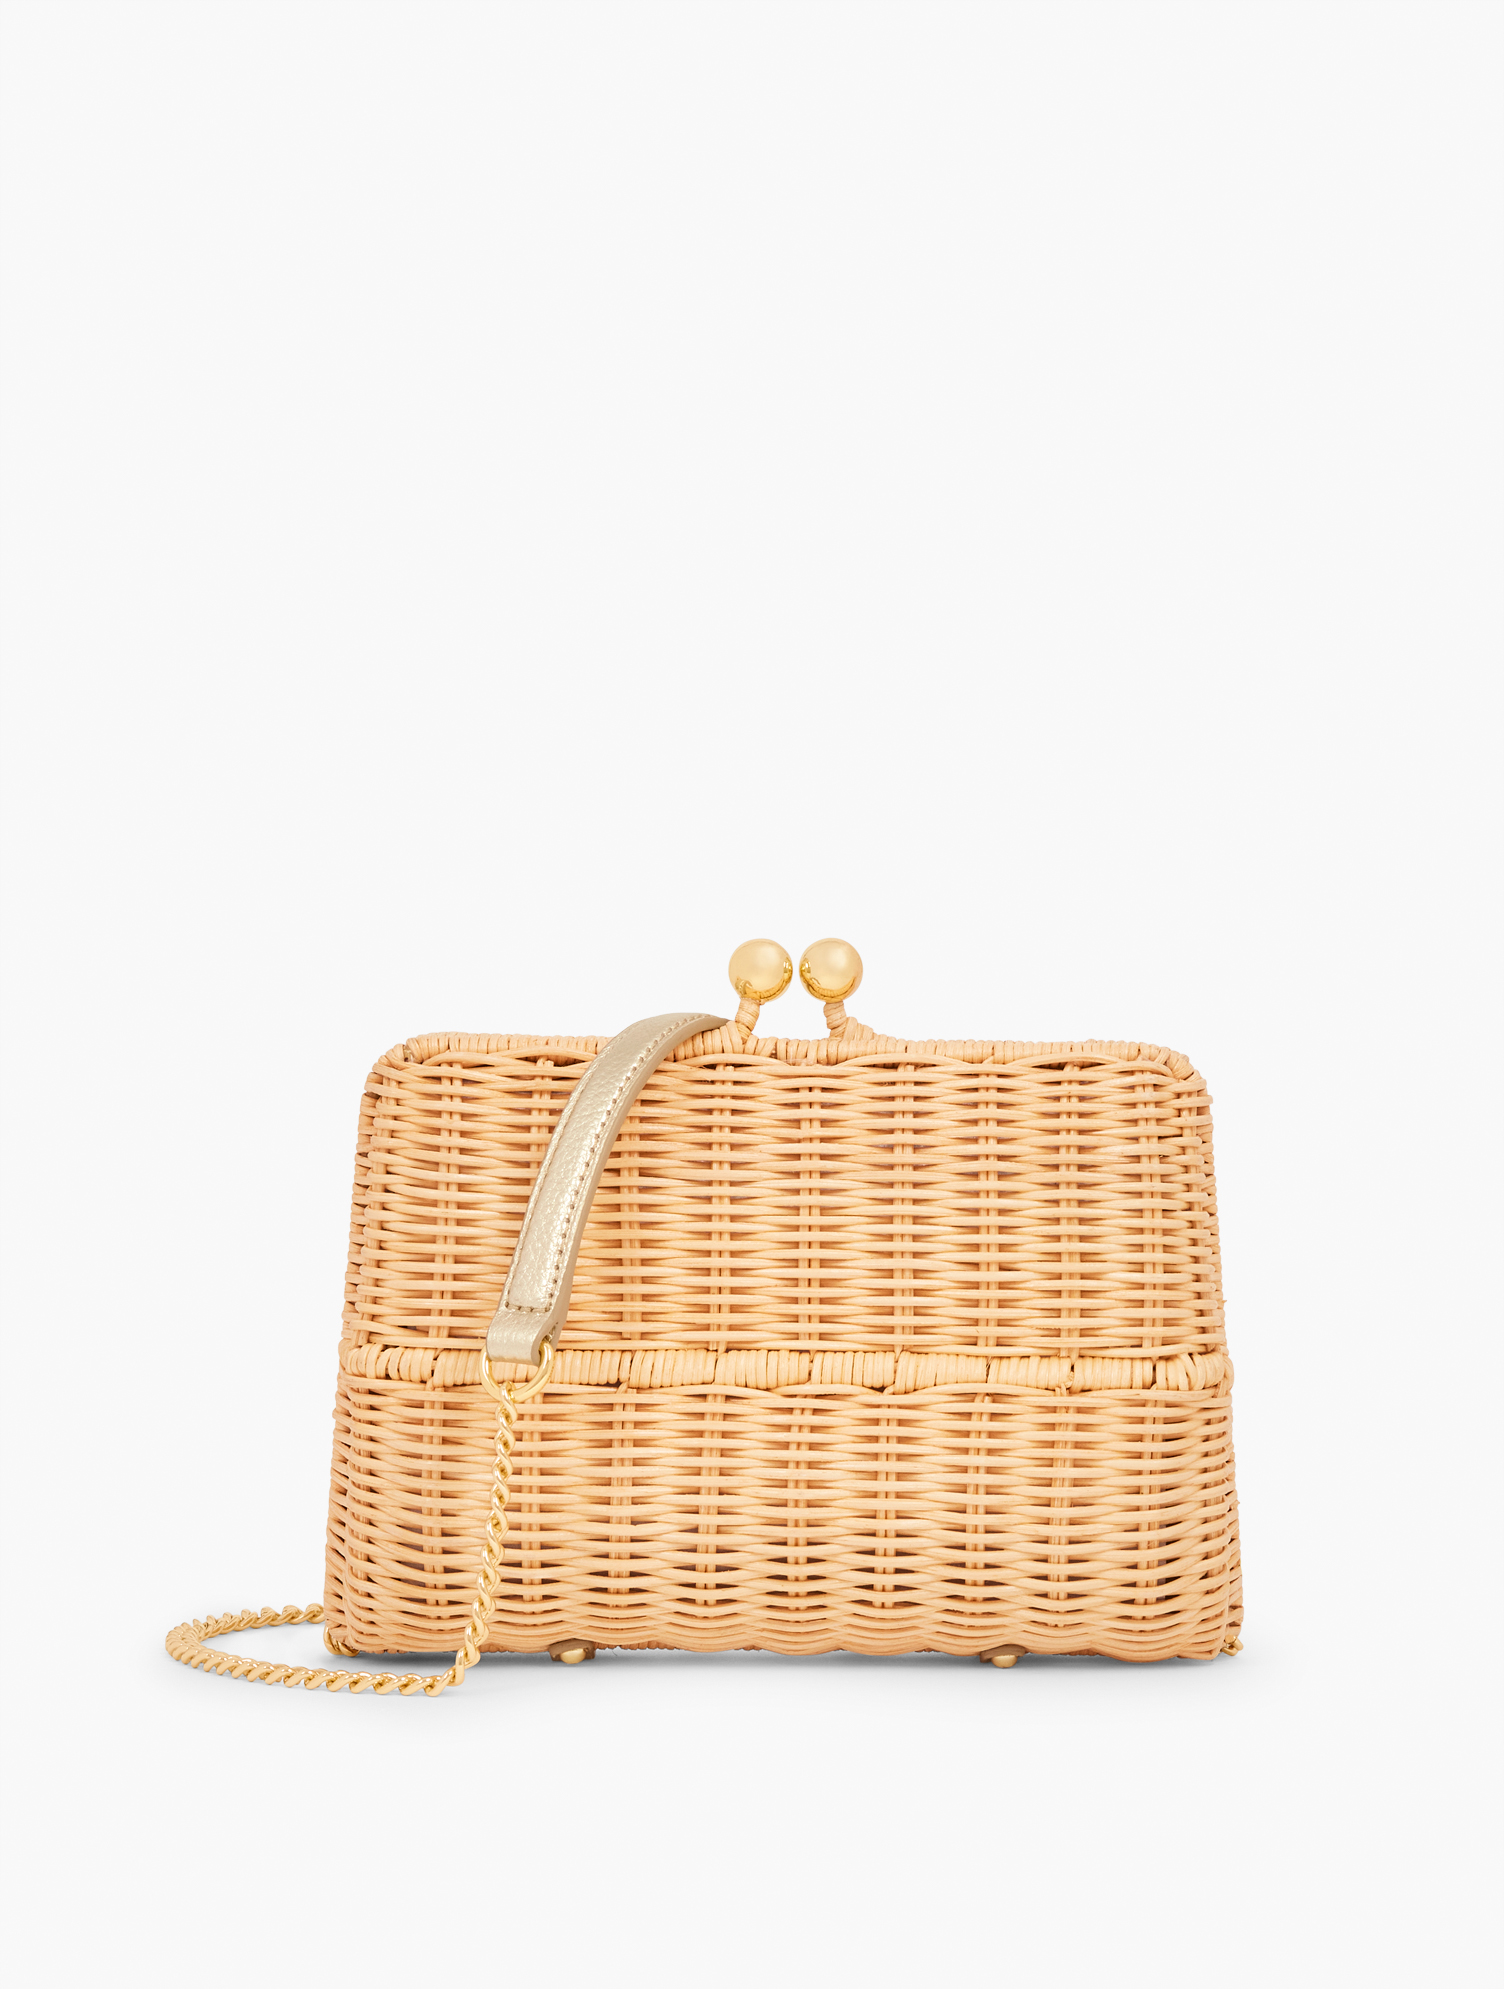 Talbots Embellished Wicker Clutch - Natural - 001